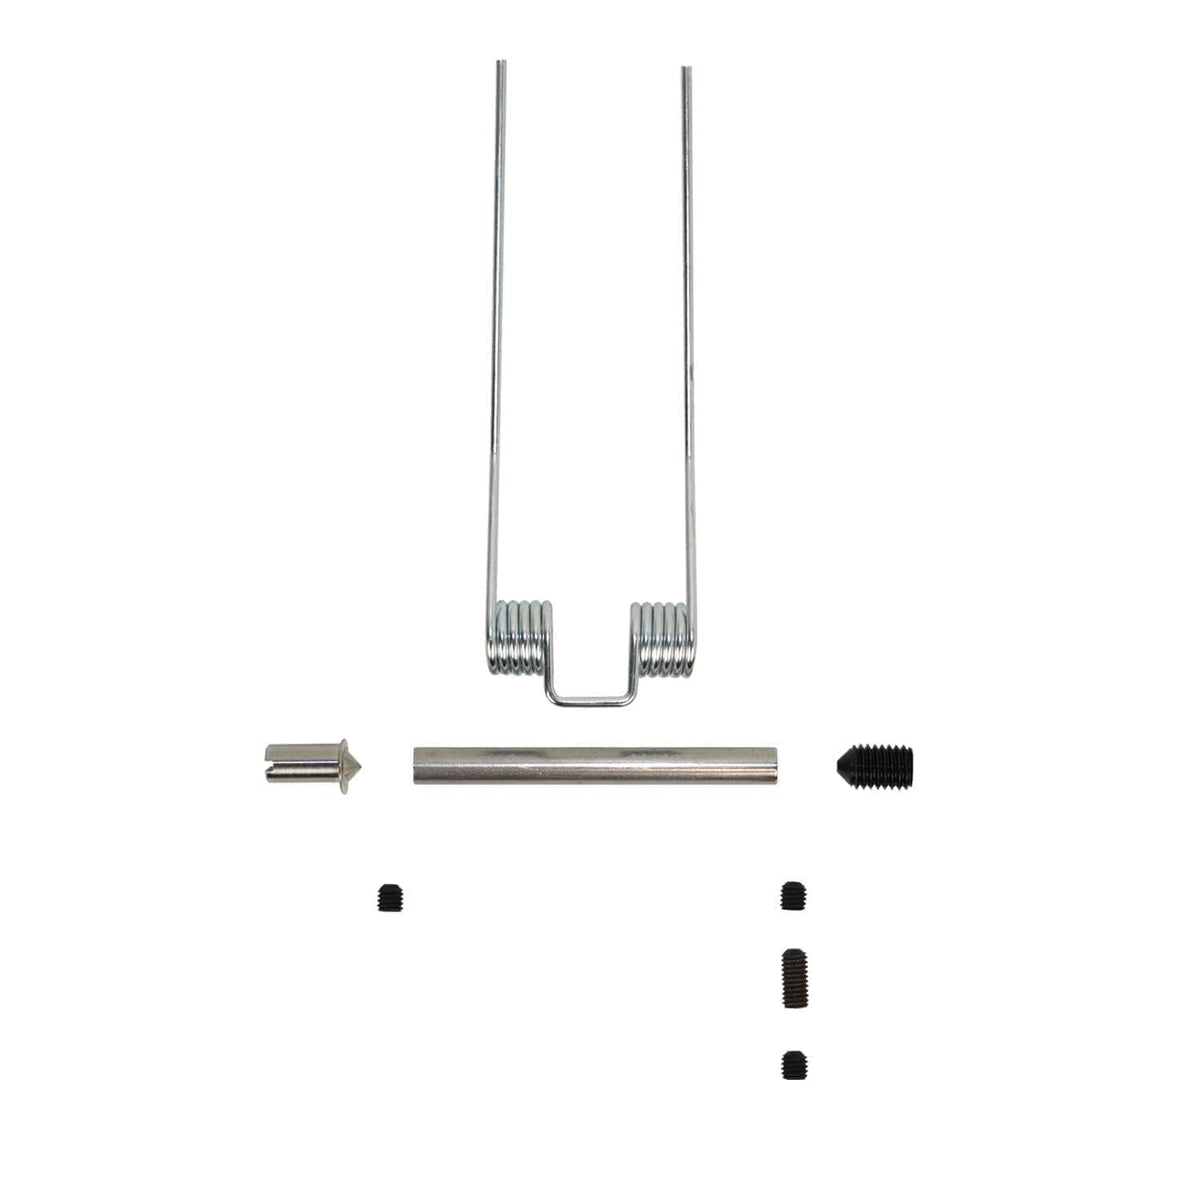 Lid hinge pin kits for use with post 1995 Aga range cookers 8mm lid hinge pin kit for a single lid